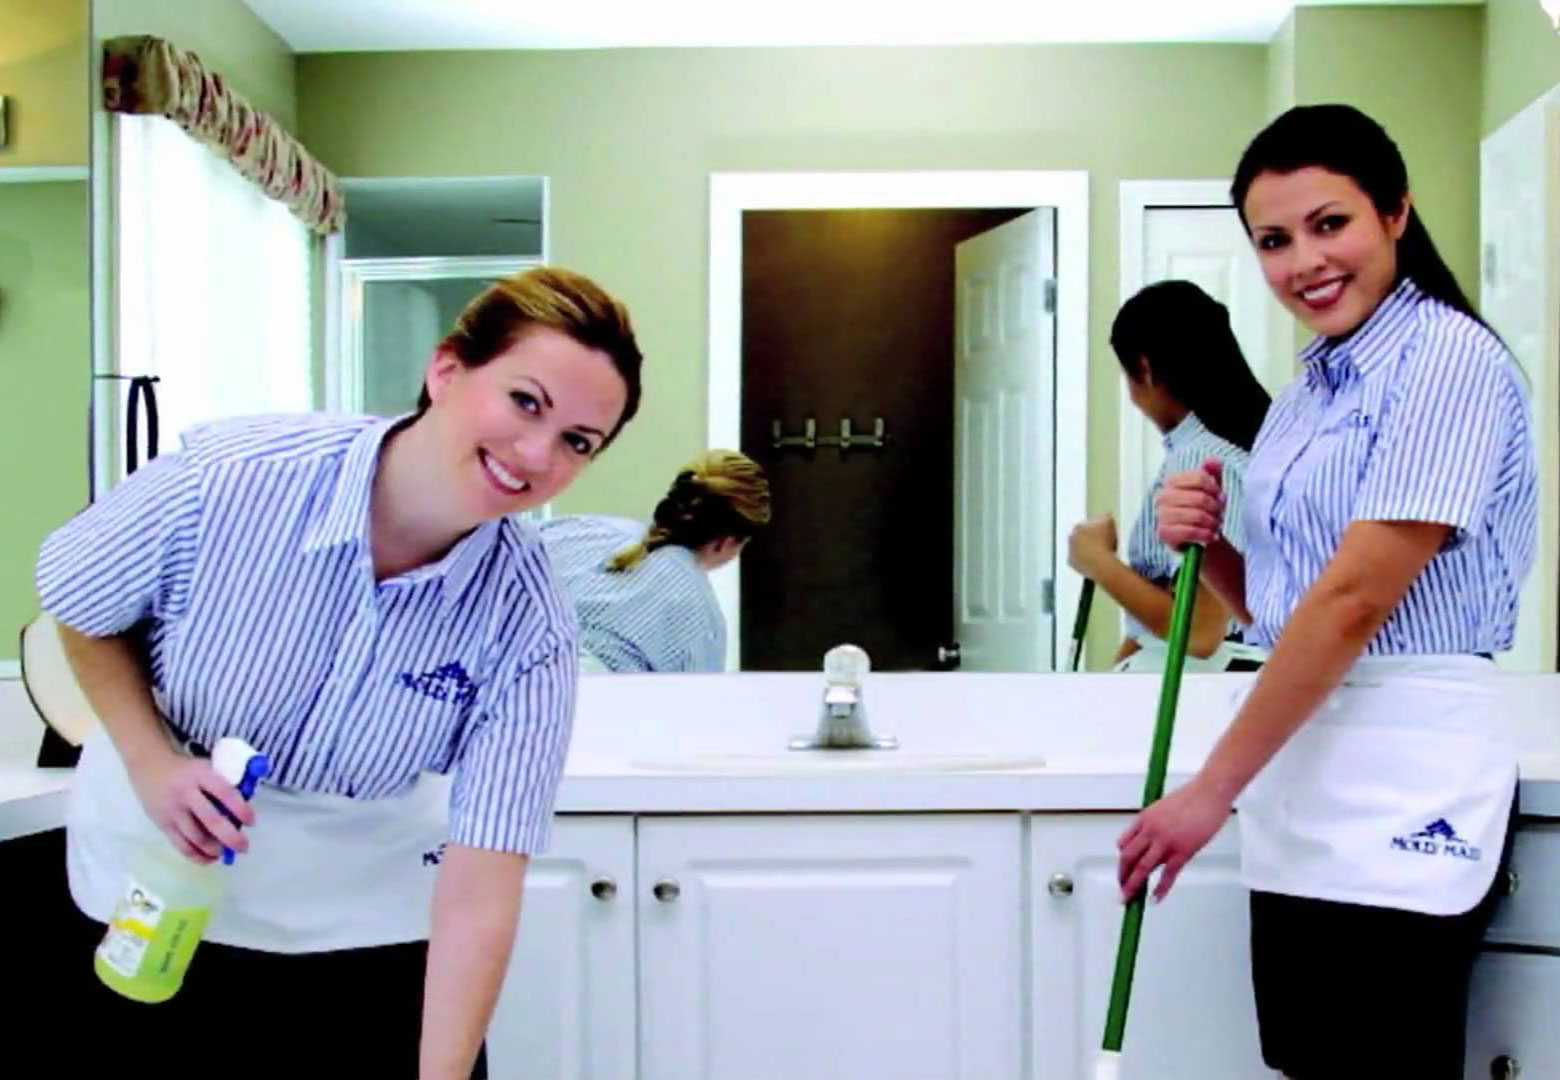 ...providing Residential Housekeeping Services in Mumbai that specializes e...